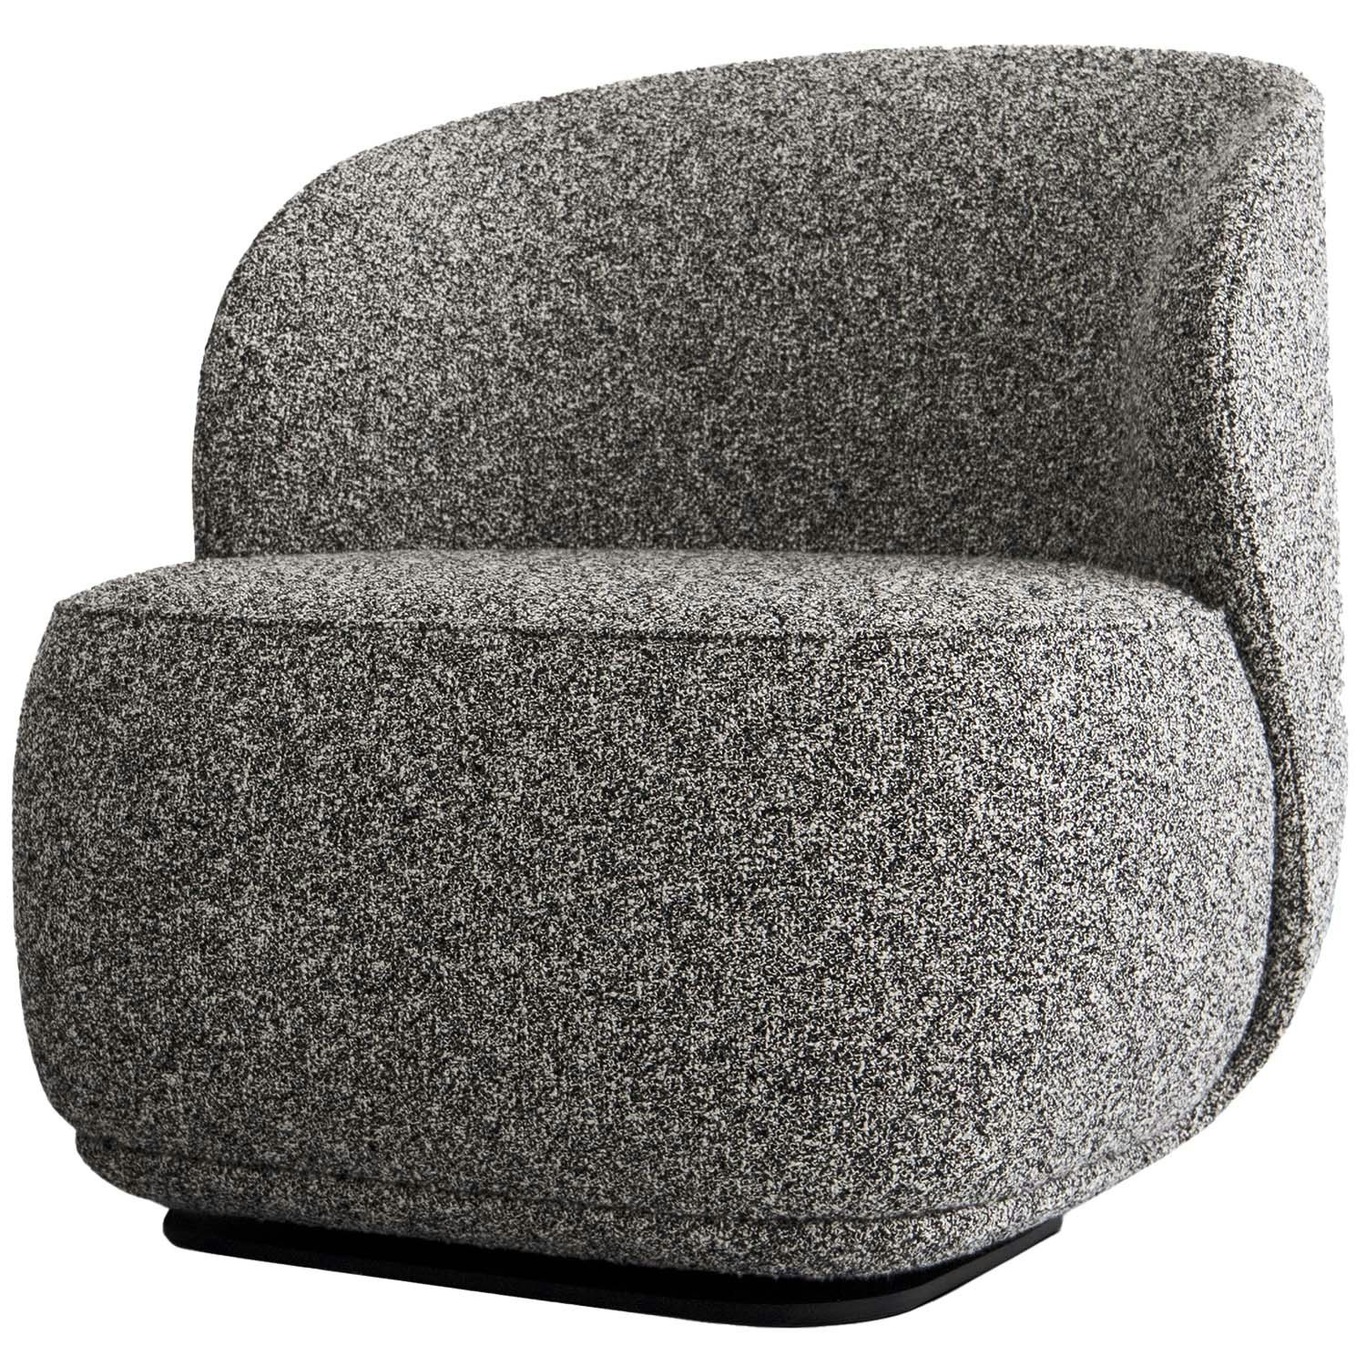 Pipe Swivel Lounge Chair With Return Function, Grey